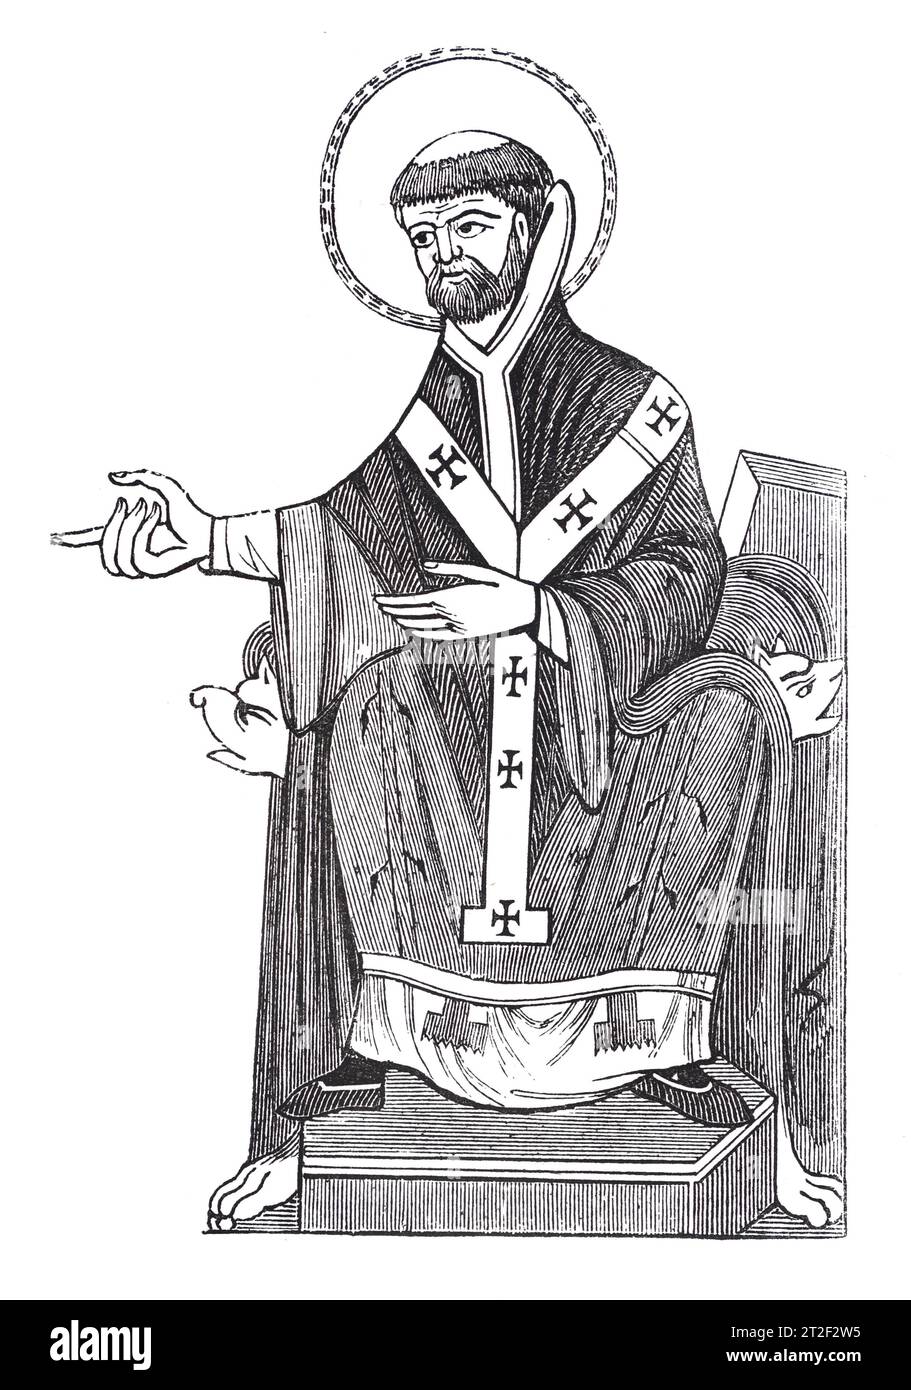 St Augustine, 6th century Archbishop of Canterbury. First Archbishop of Canterbury. Royal MS. Black and White Illustration from the 'Old England' published by James Sangster in 1860. Stock Photo